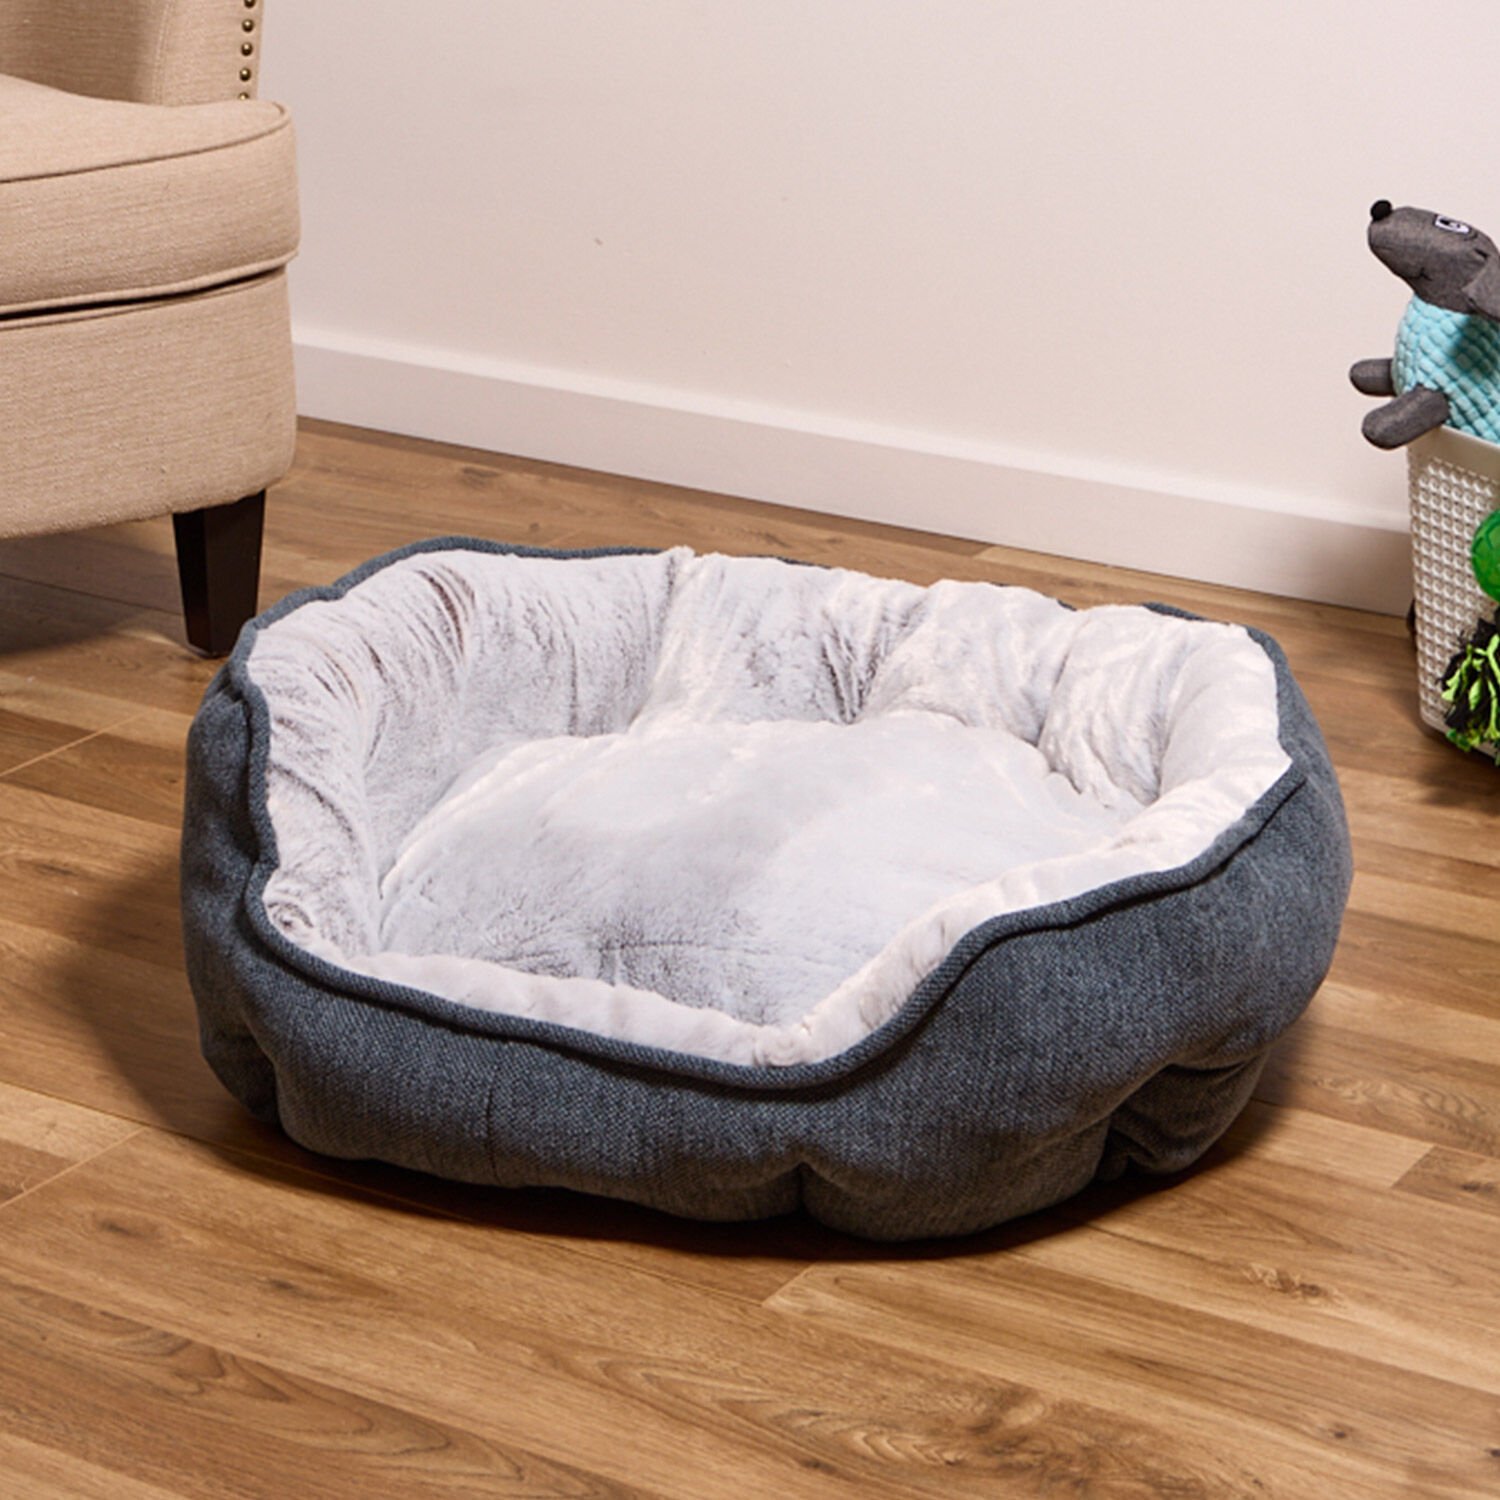 Soft Plush Chenille Pet Bed Home Store More